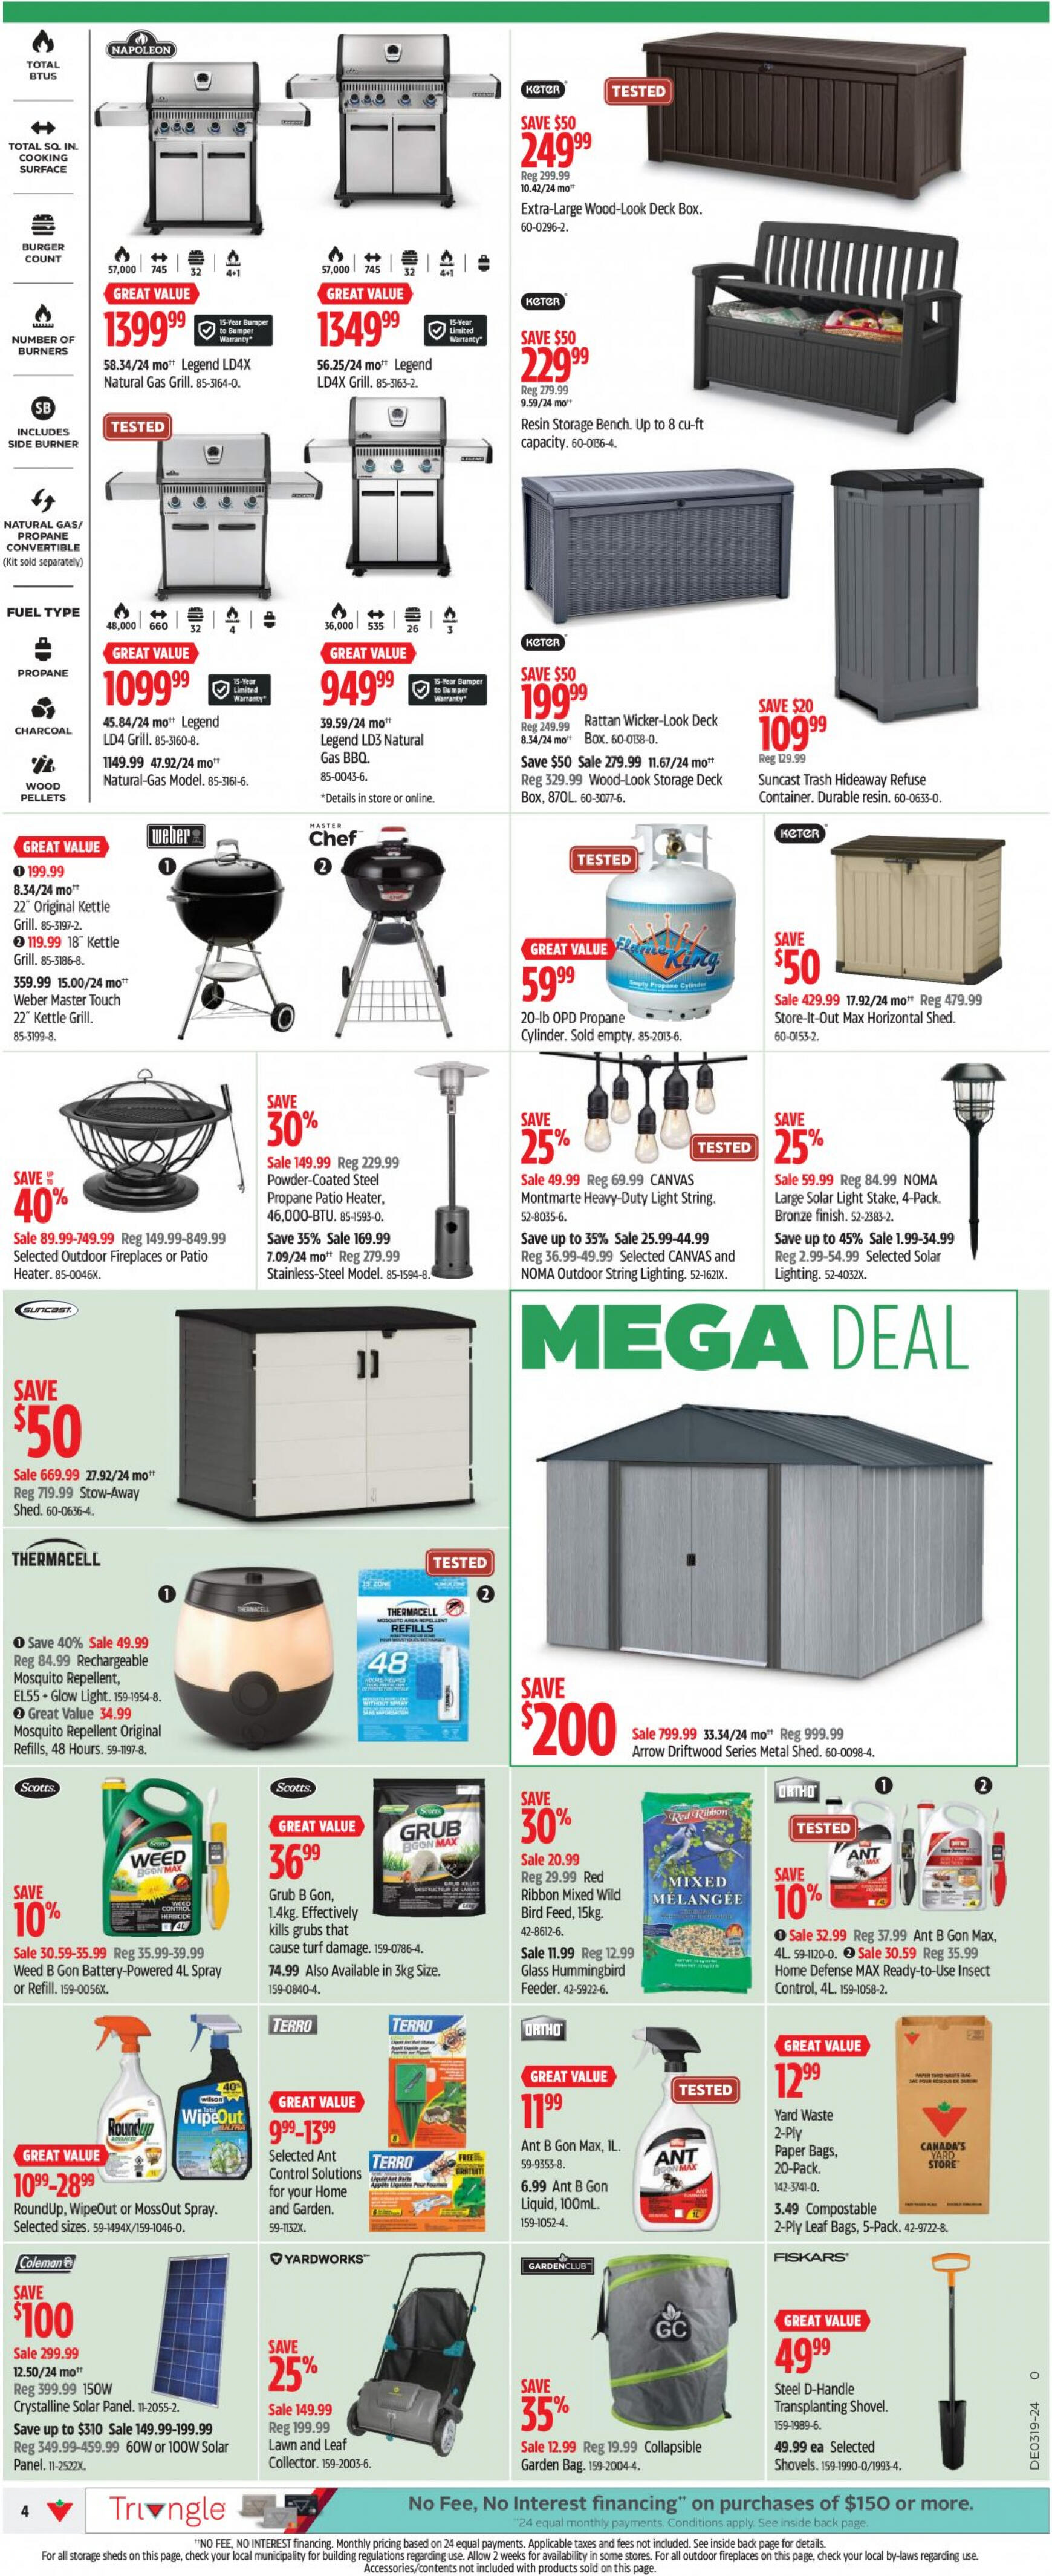 canadian-tire - Canadian Tire flyer current 02.05. - 08.05. - page: 4